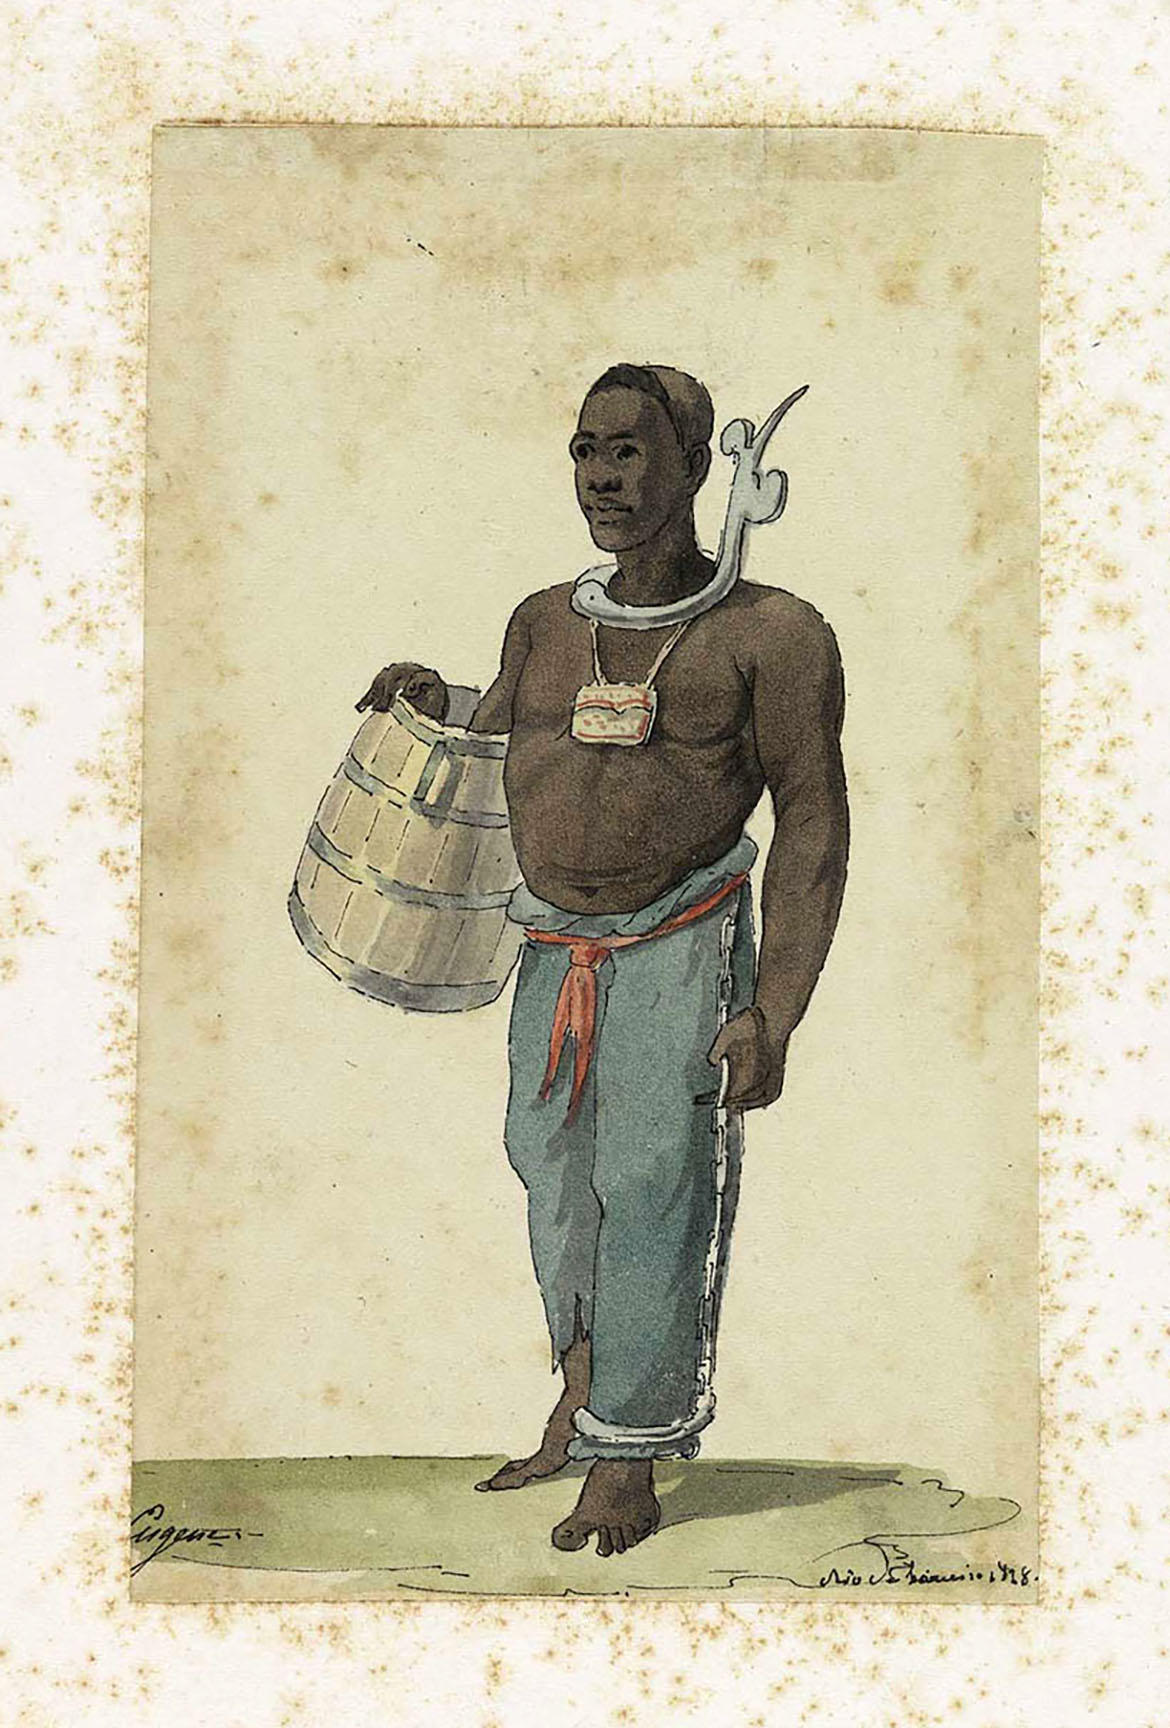 1828 drawing of Brazilian slave with metal hook restraint.